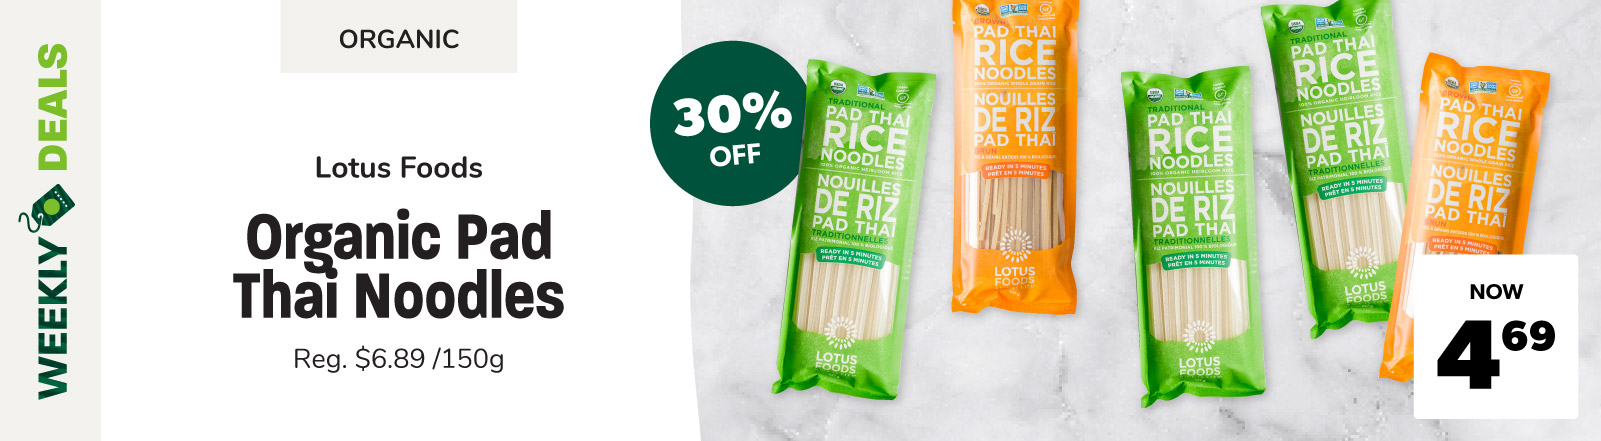 save on noodles this week